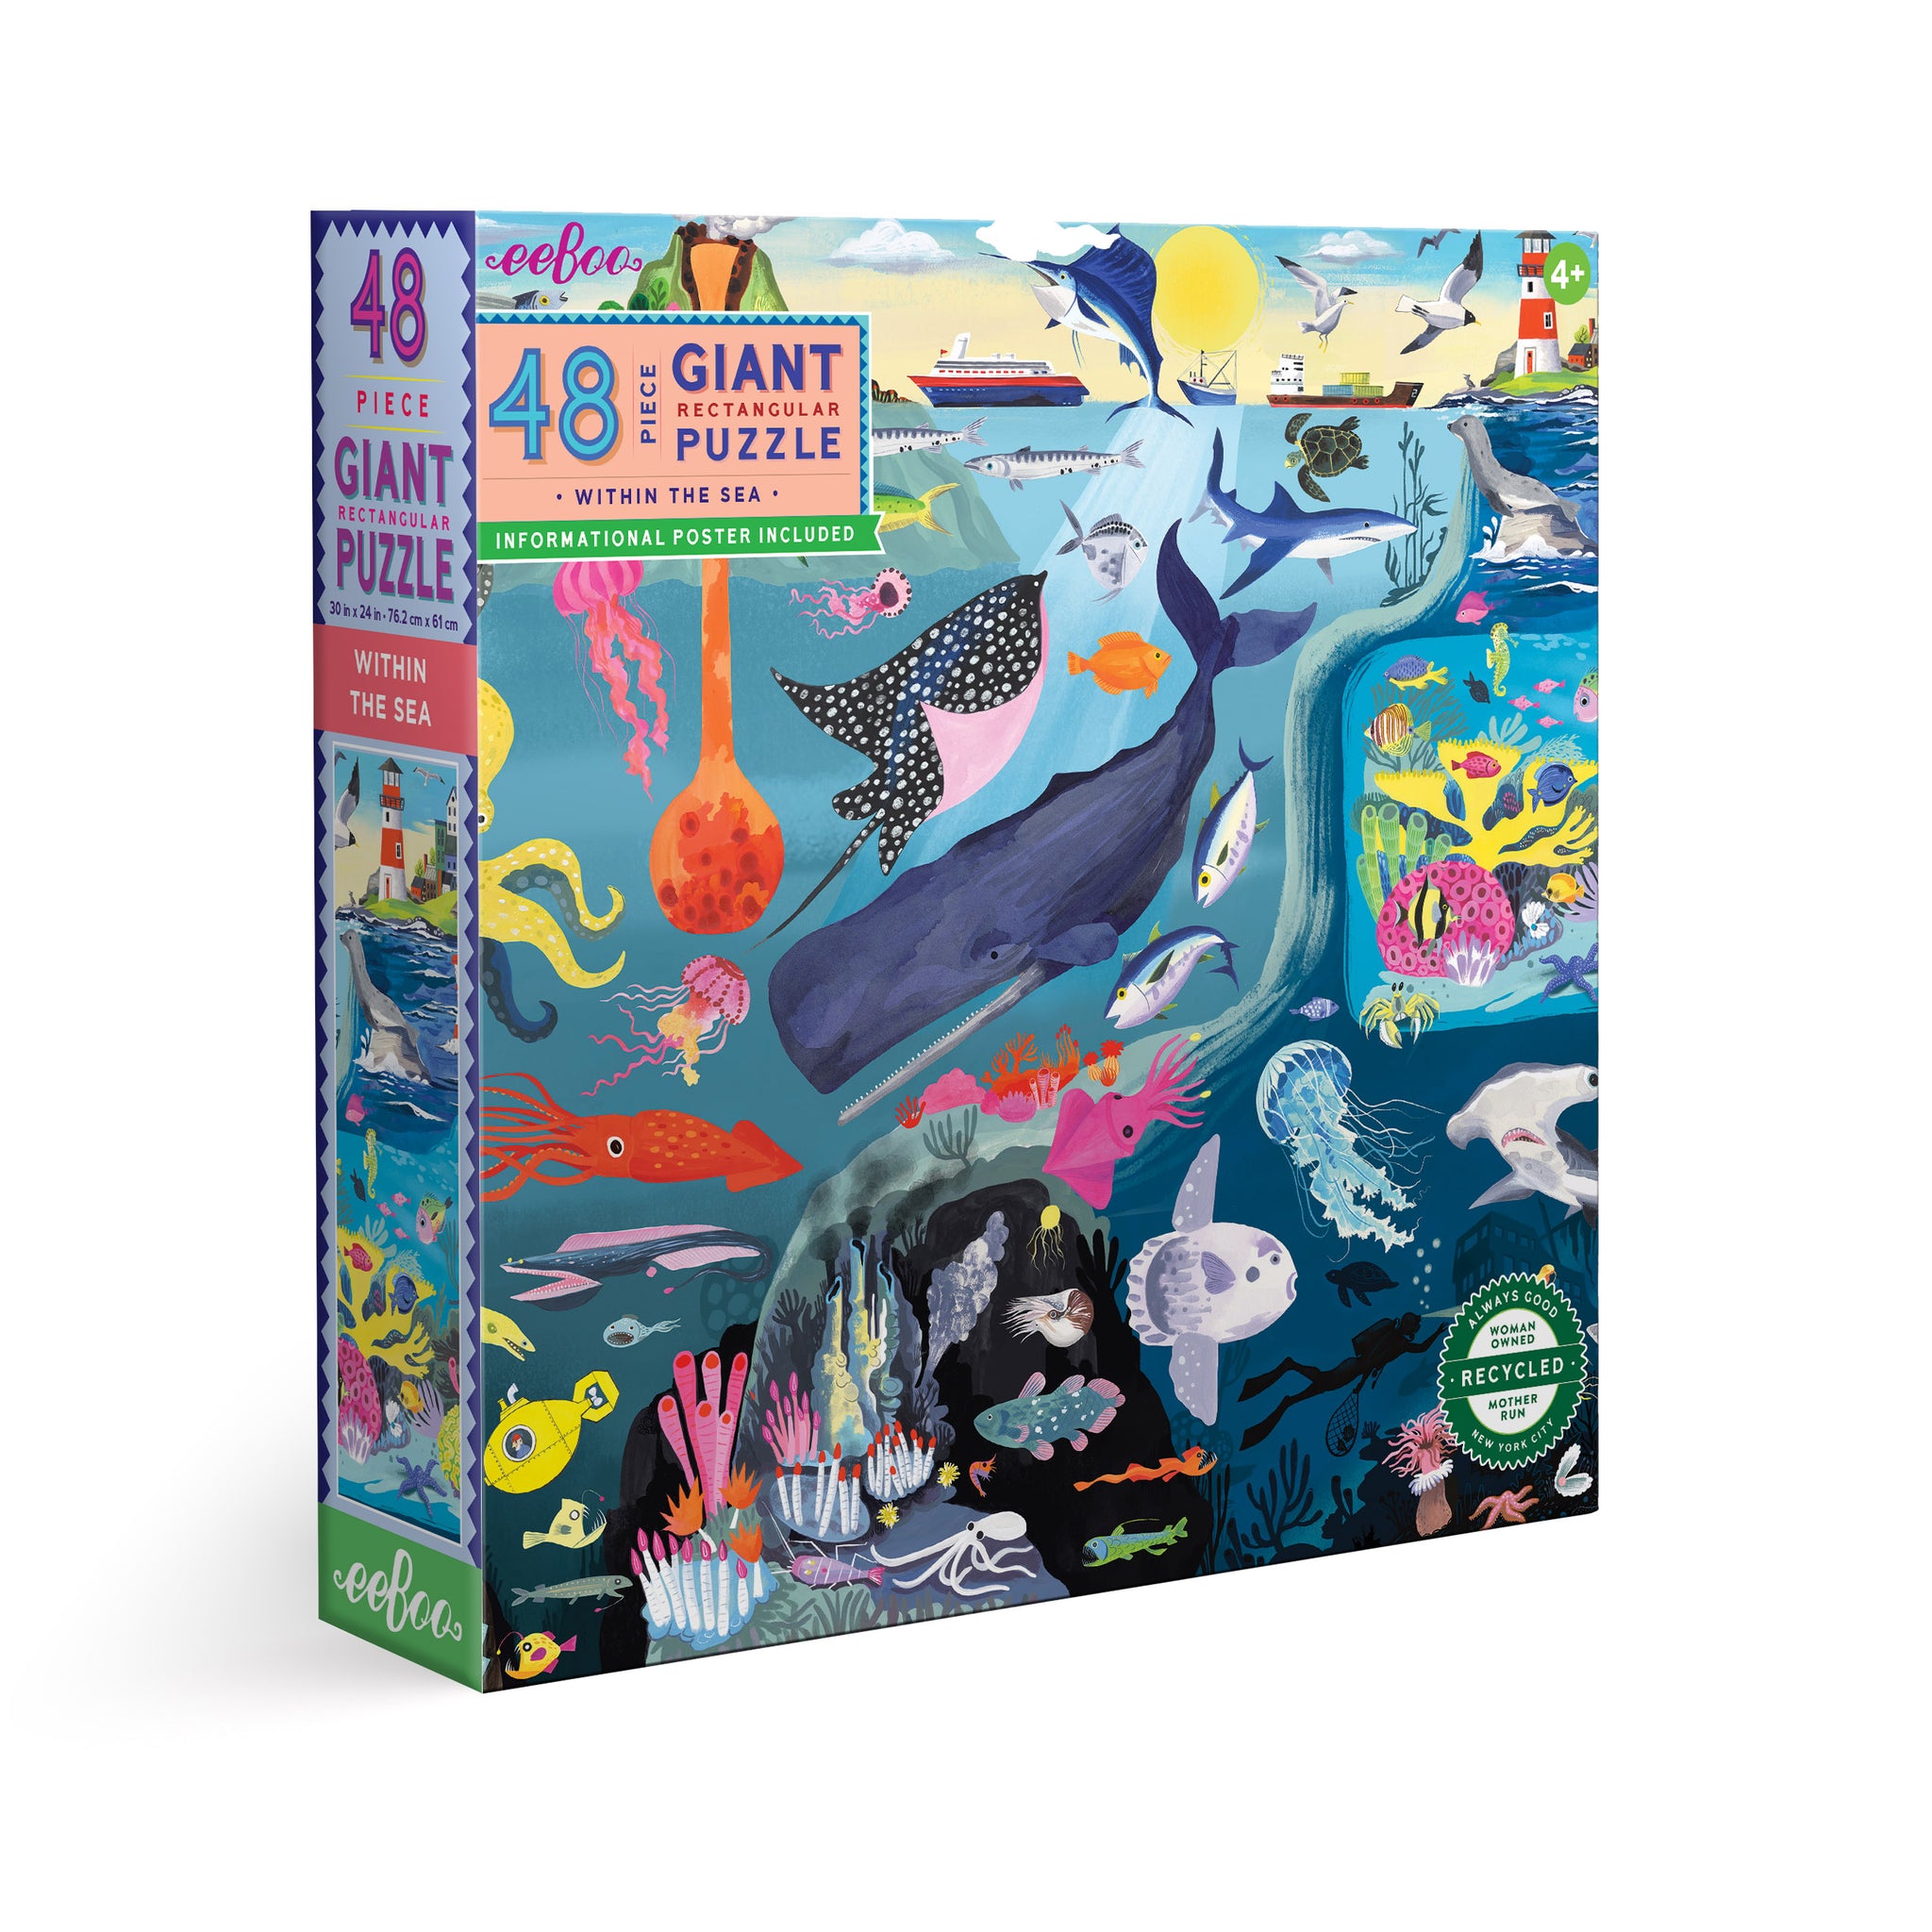 48 piece giant puzzle | within the sea